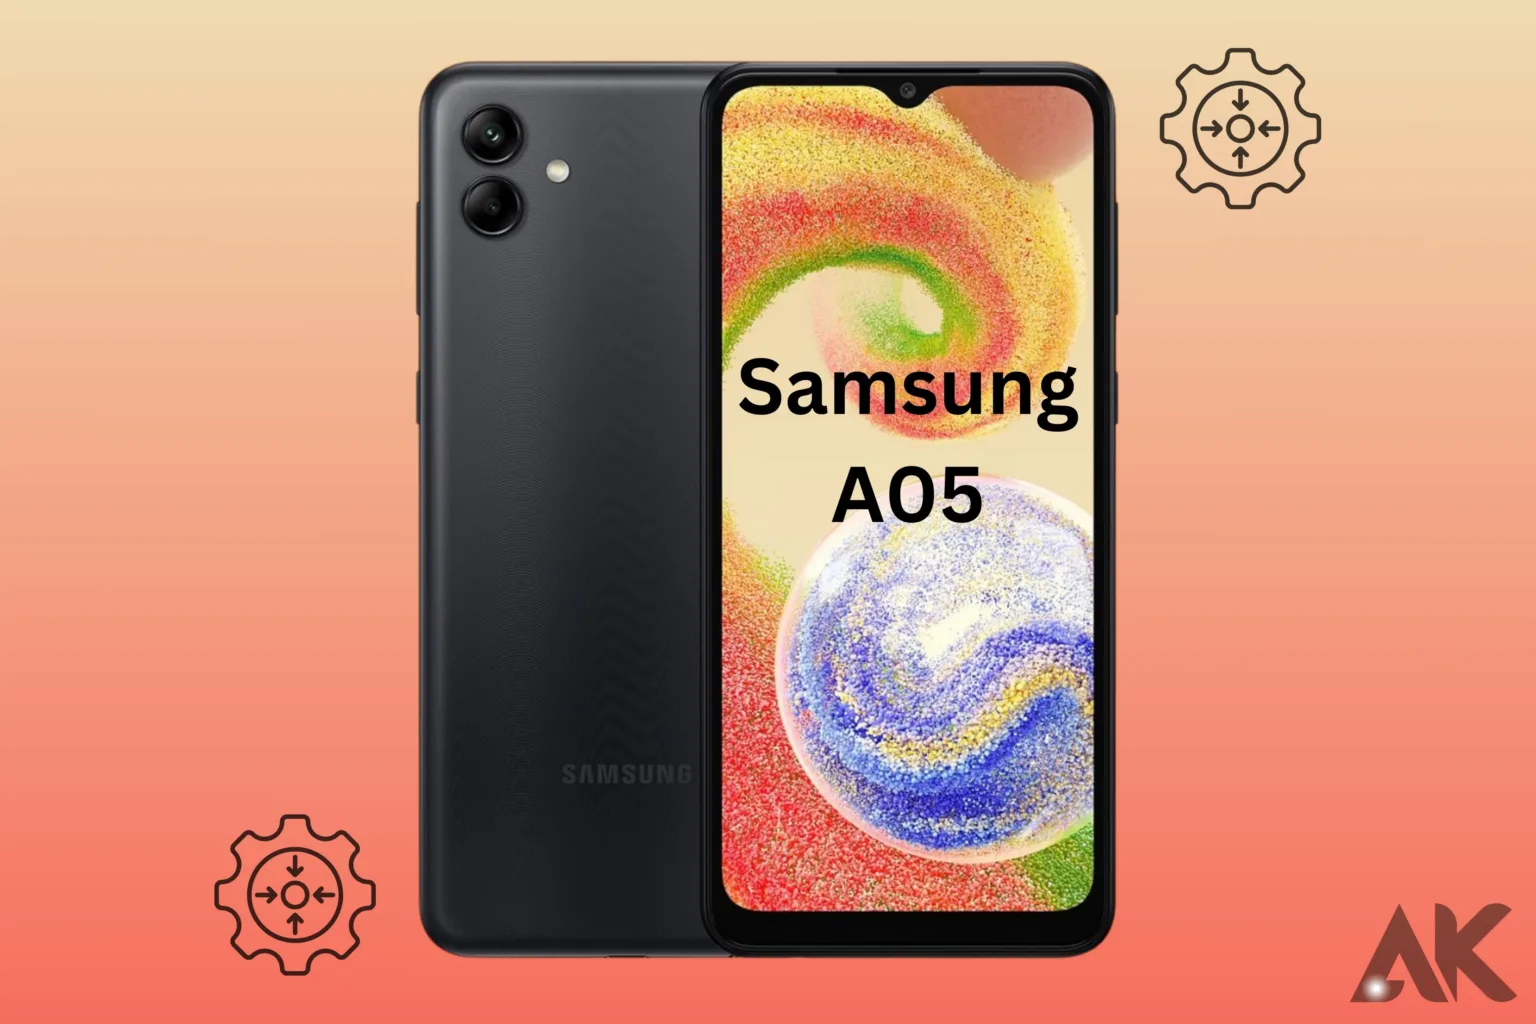 Samsung A05 Specifications